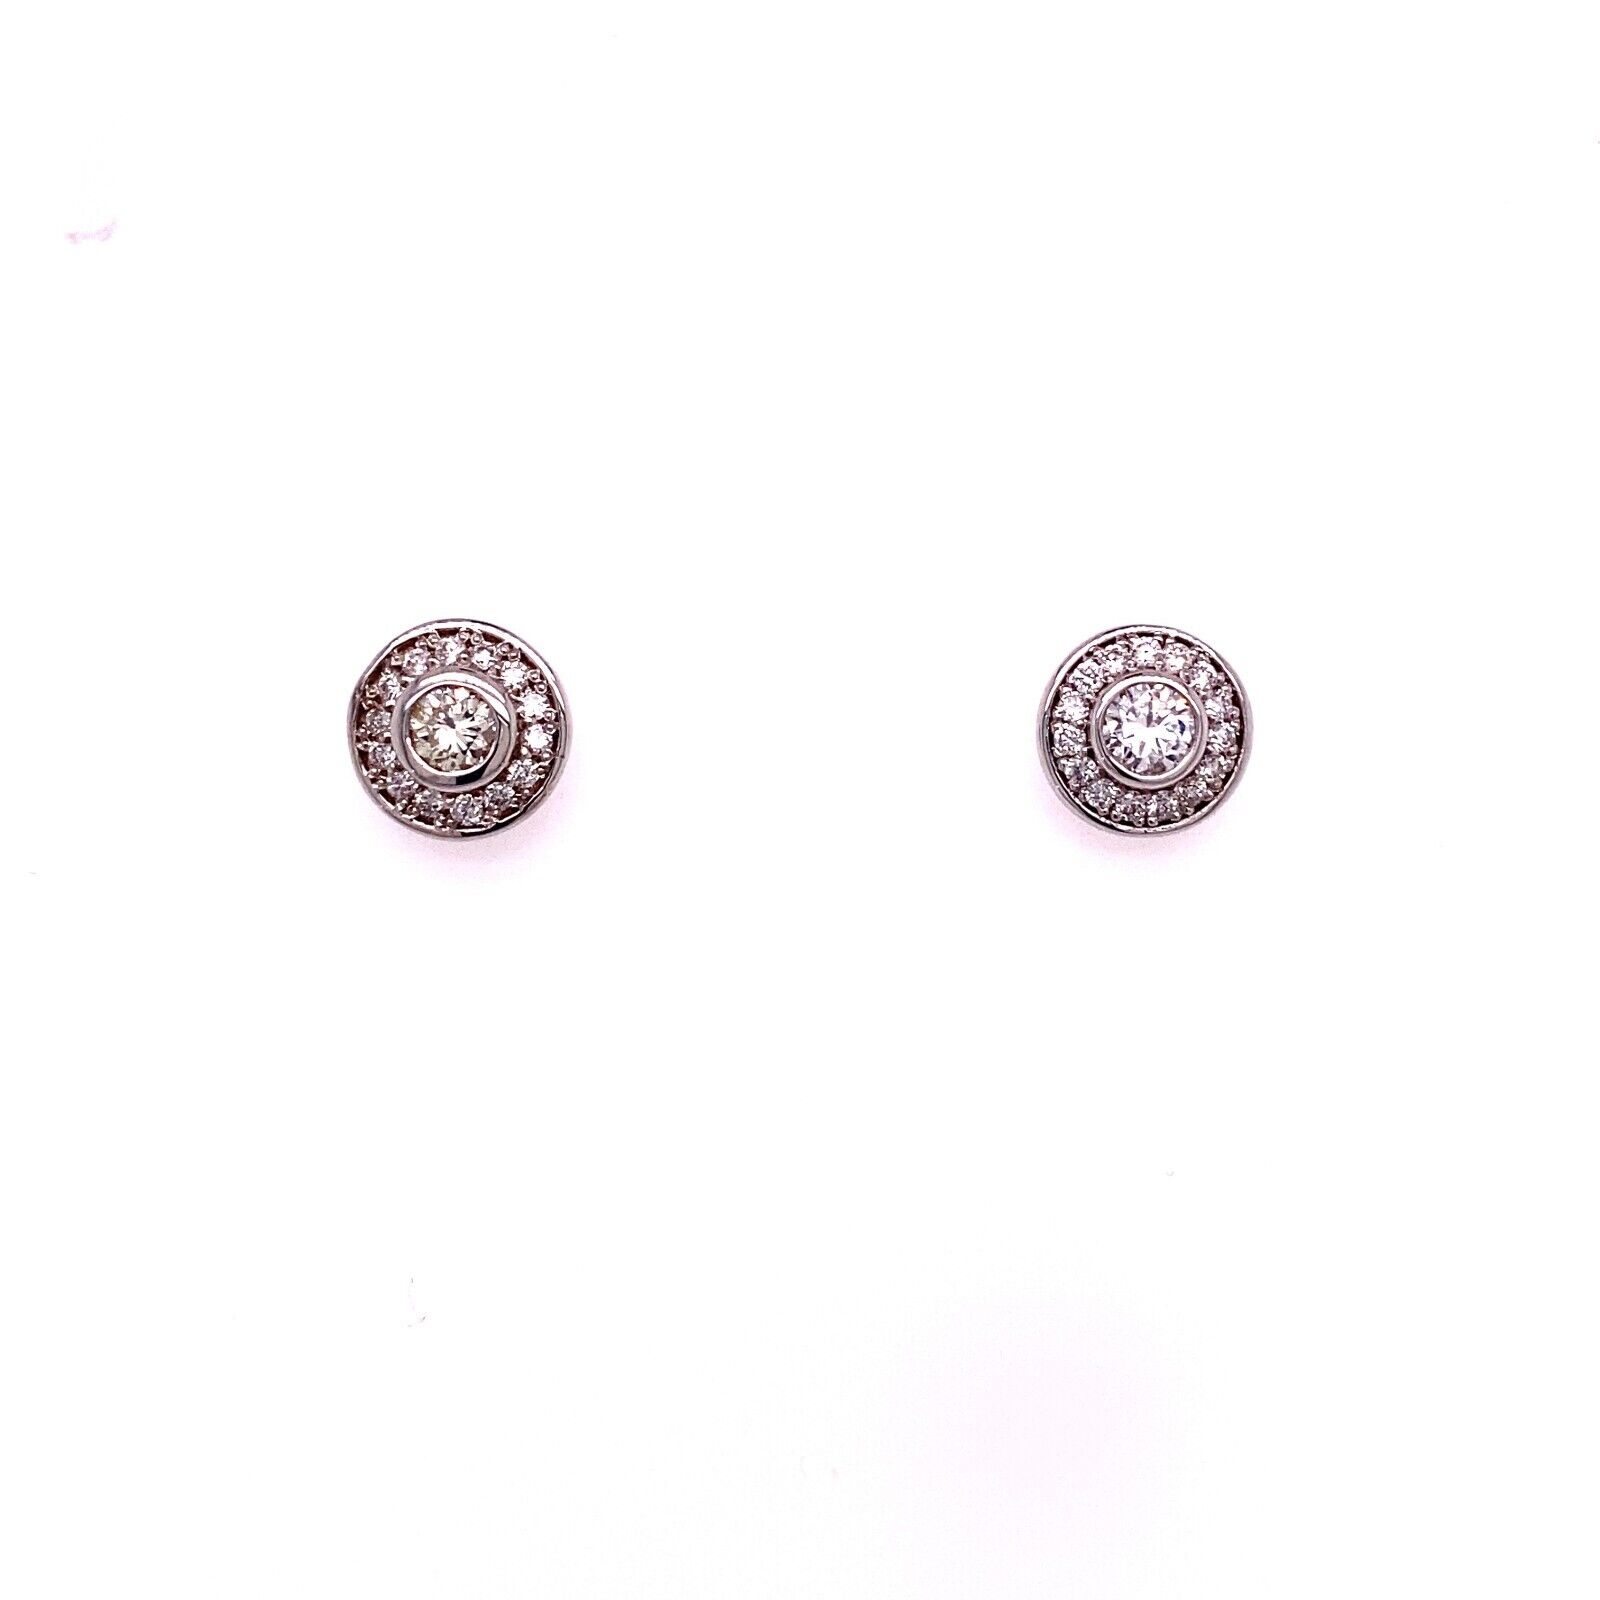 Modern 0.55ct Round Brilliant Cut Diamond Halo Earrings in 18ct White Gold For Sale